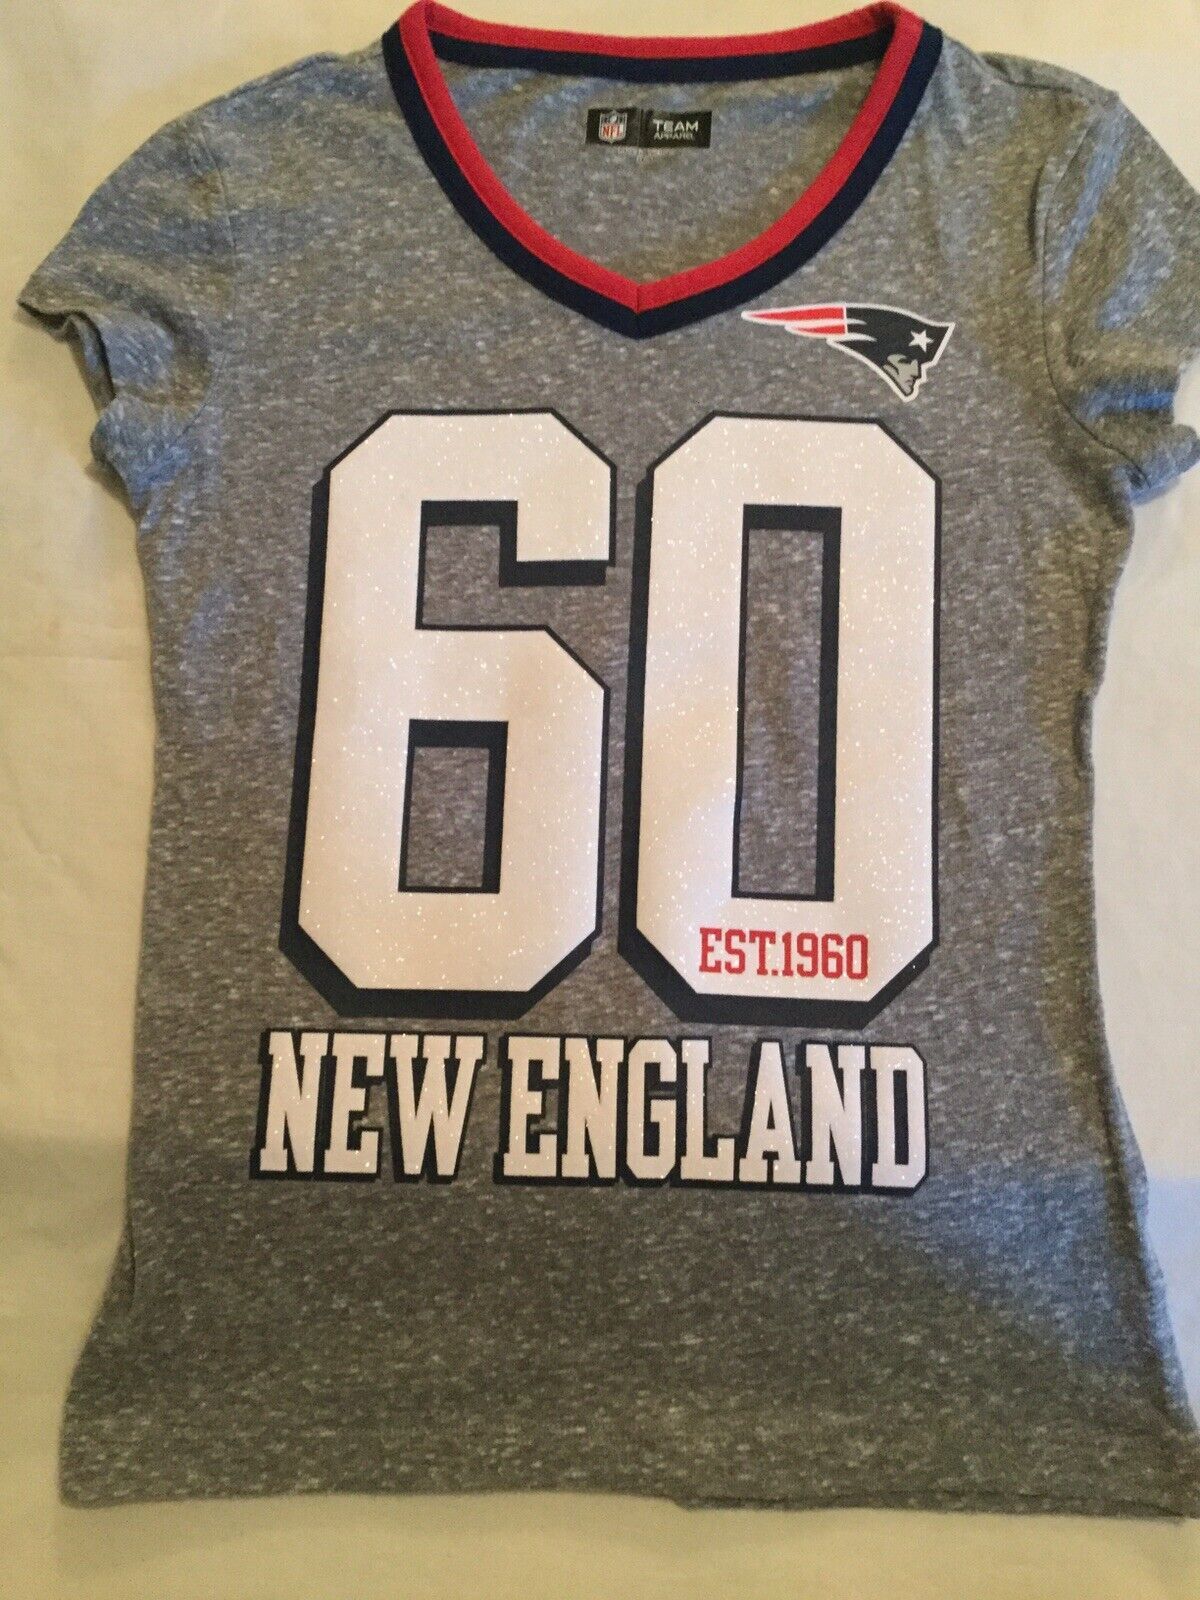 Primary image for NFL Team Apparel Size 8 10 New England Patriots football jersey shirt gray girls